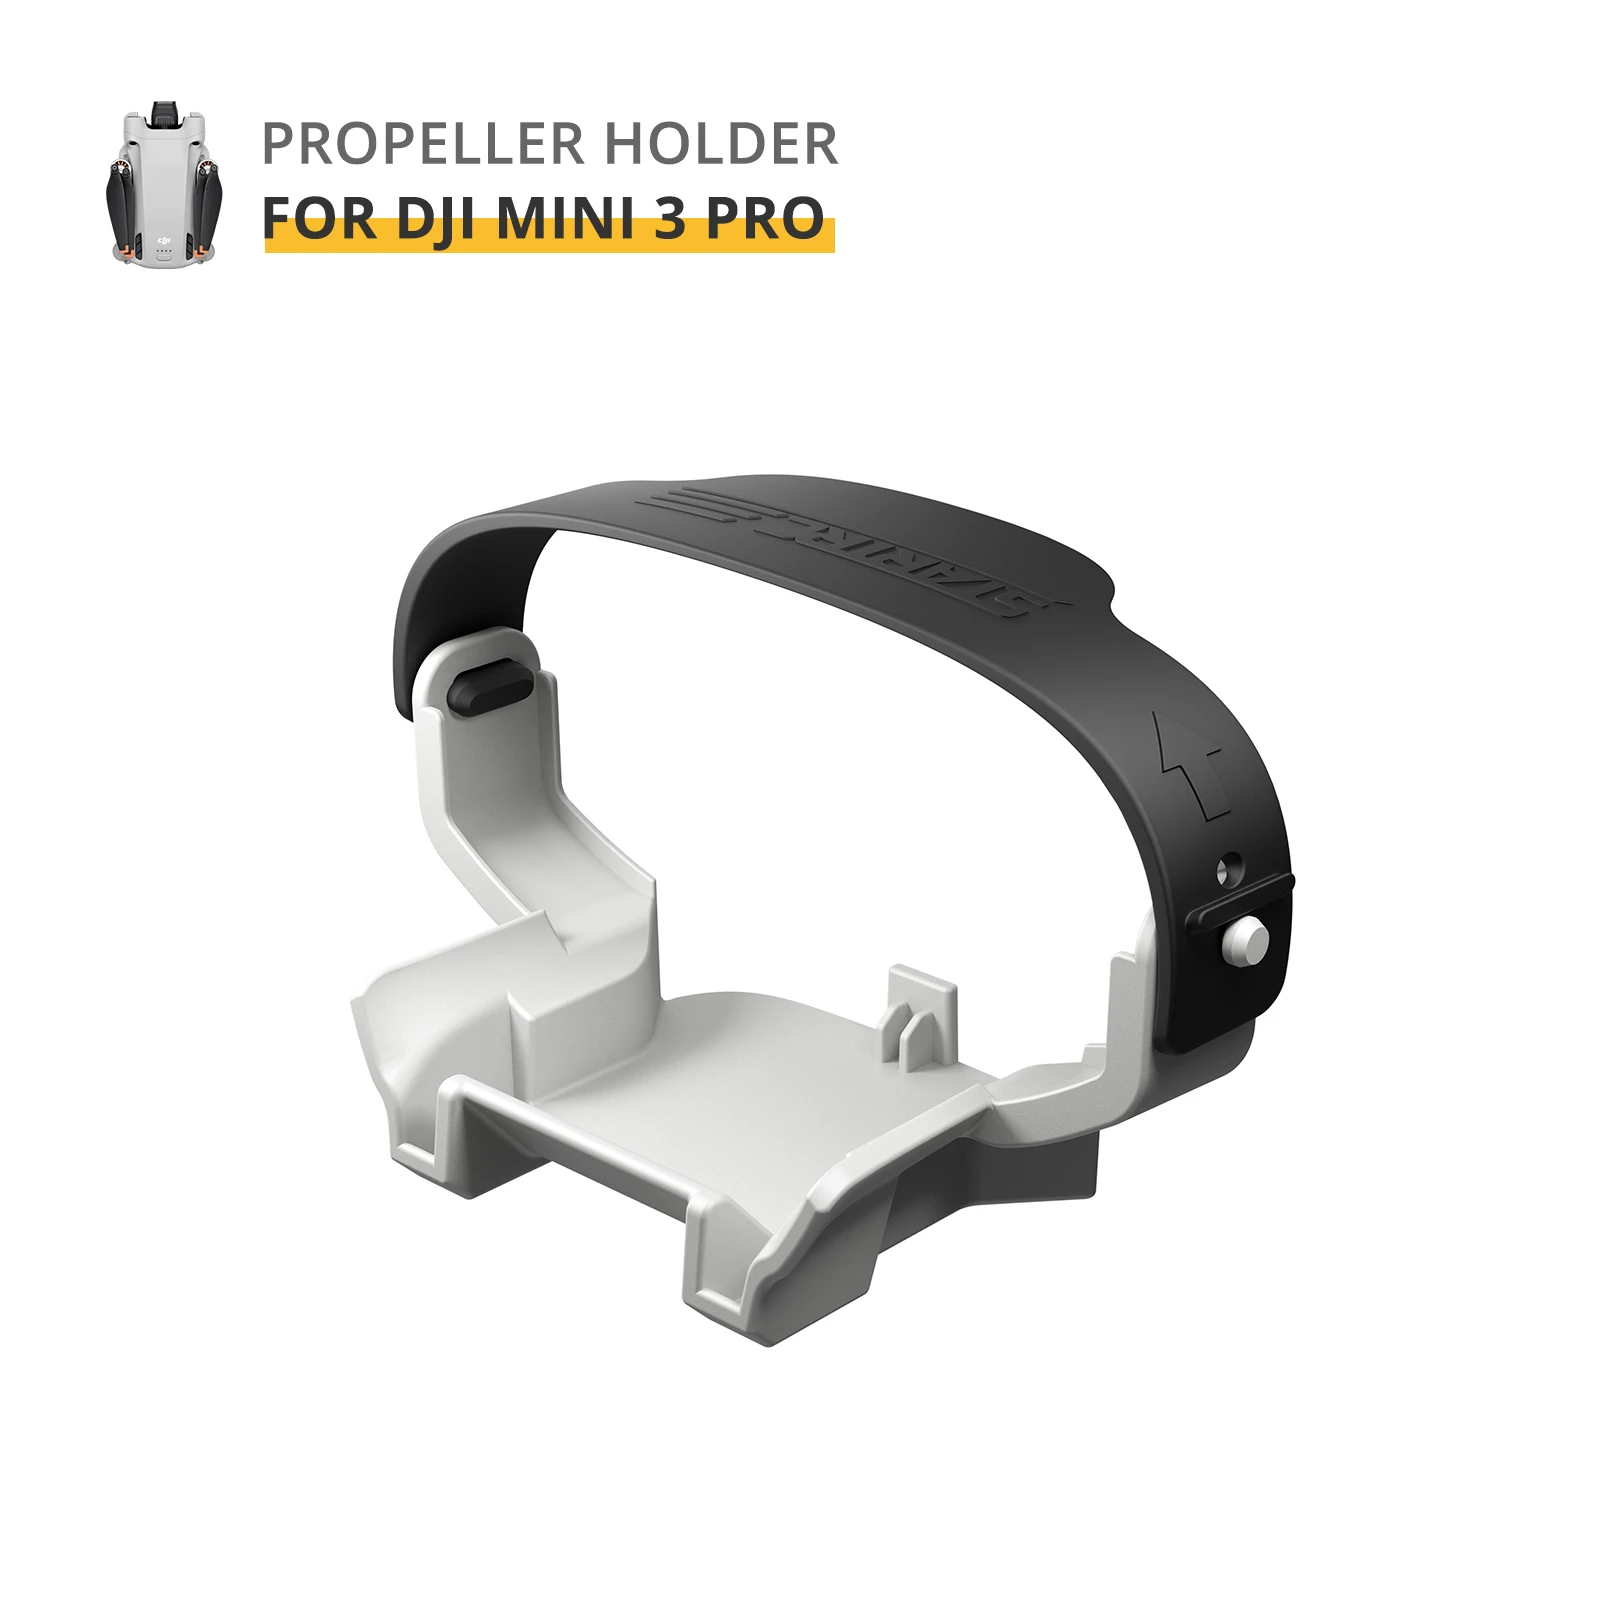 

Propeller Holder for DJI Mini 3 Pro Wings Fixed Stabilizers Protective Prop Blades Strap for Mavic Mini3 Drone Accessories